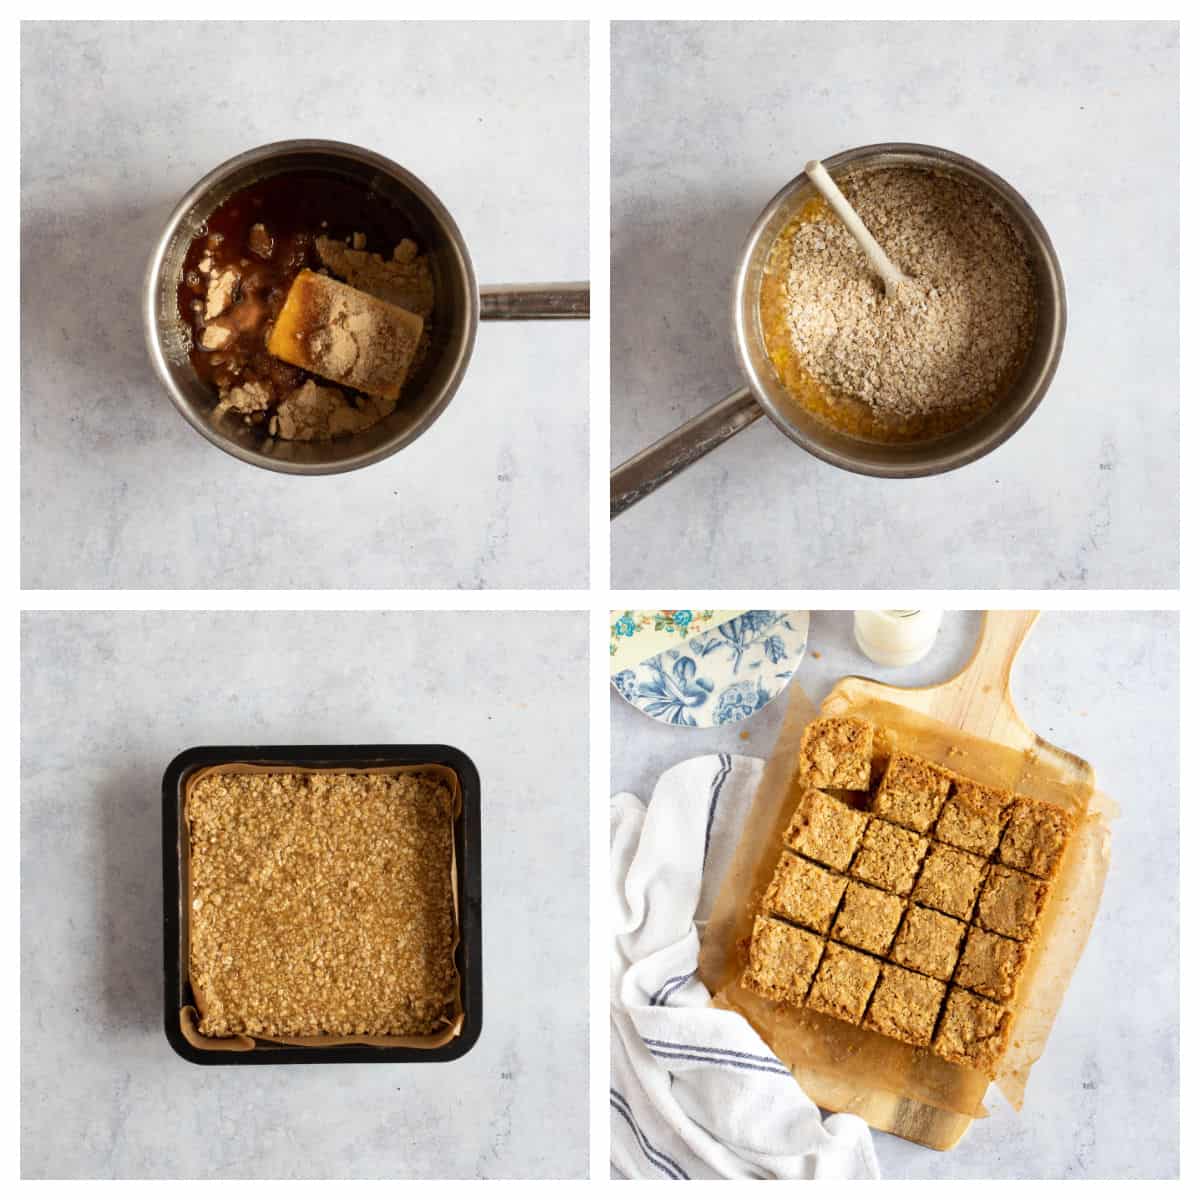 Step by step photo instructions for making maple syrup flapjacks.